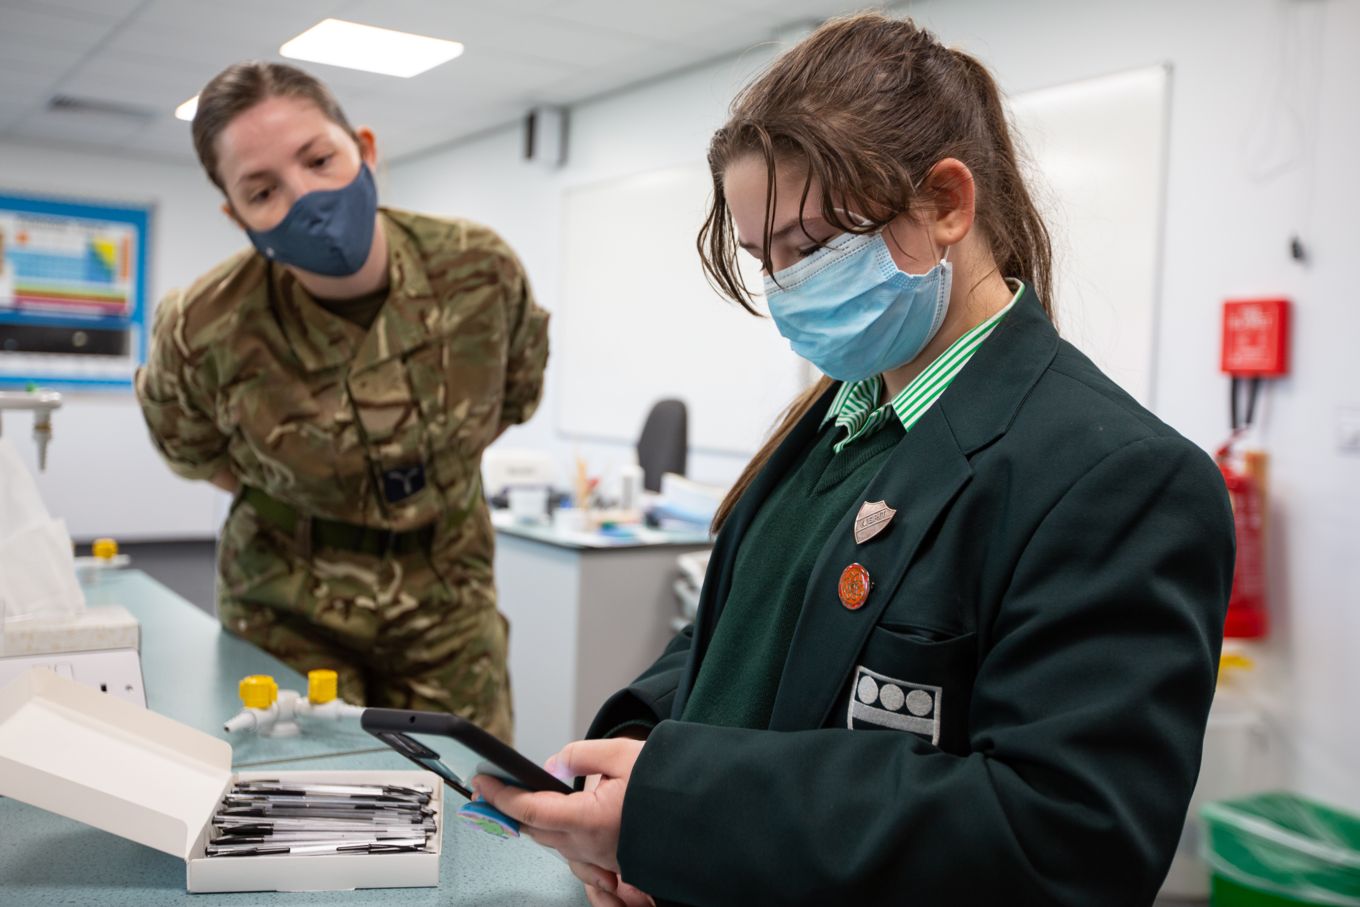 SAC Kayleigh Coleman from RAF Wittering assists a pupil with the Coronavirus app